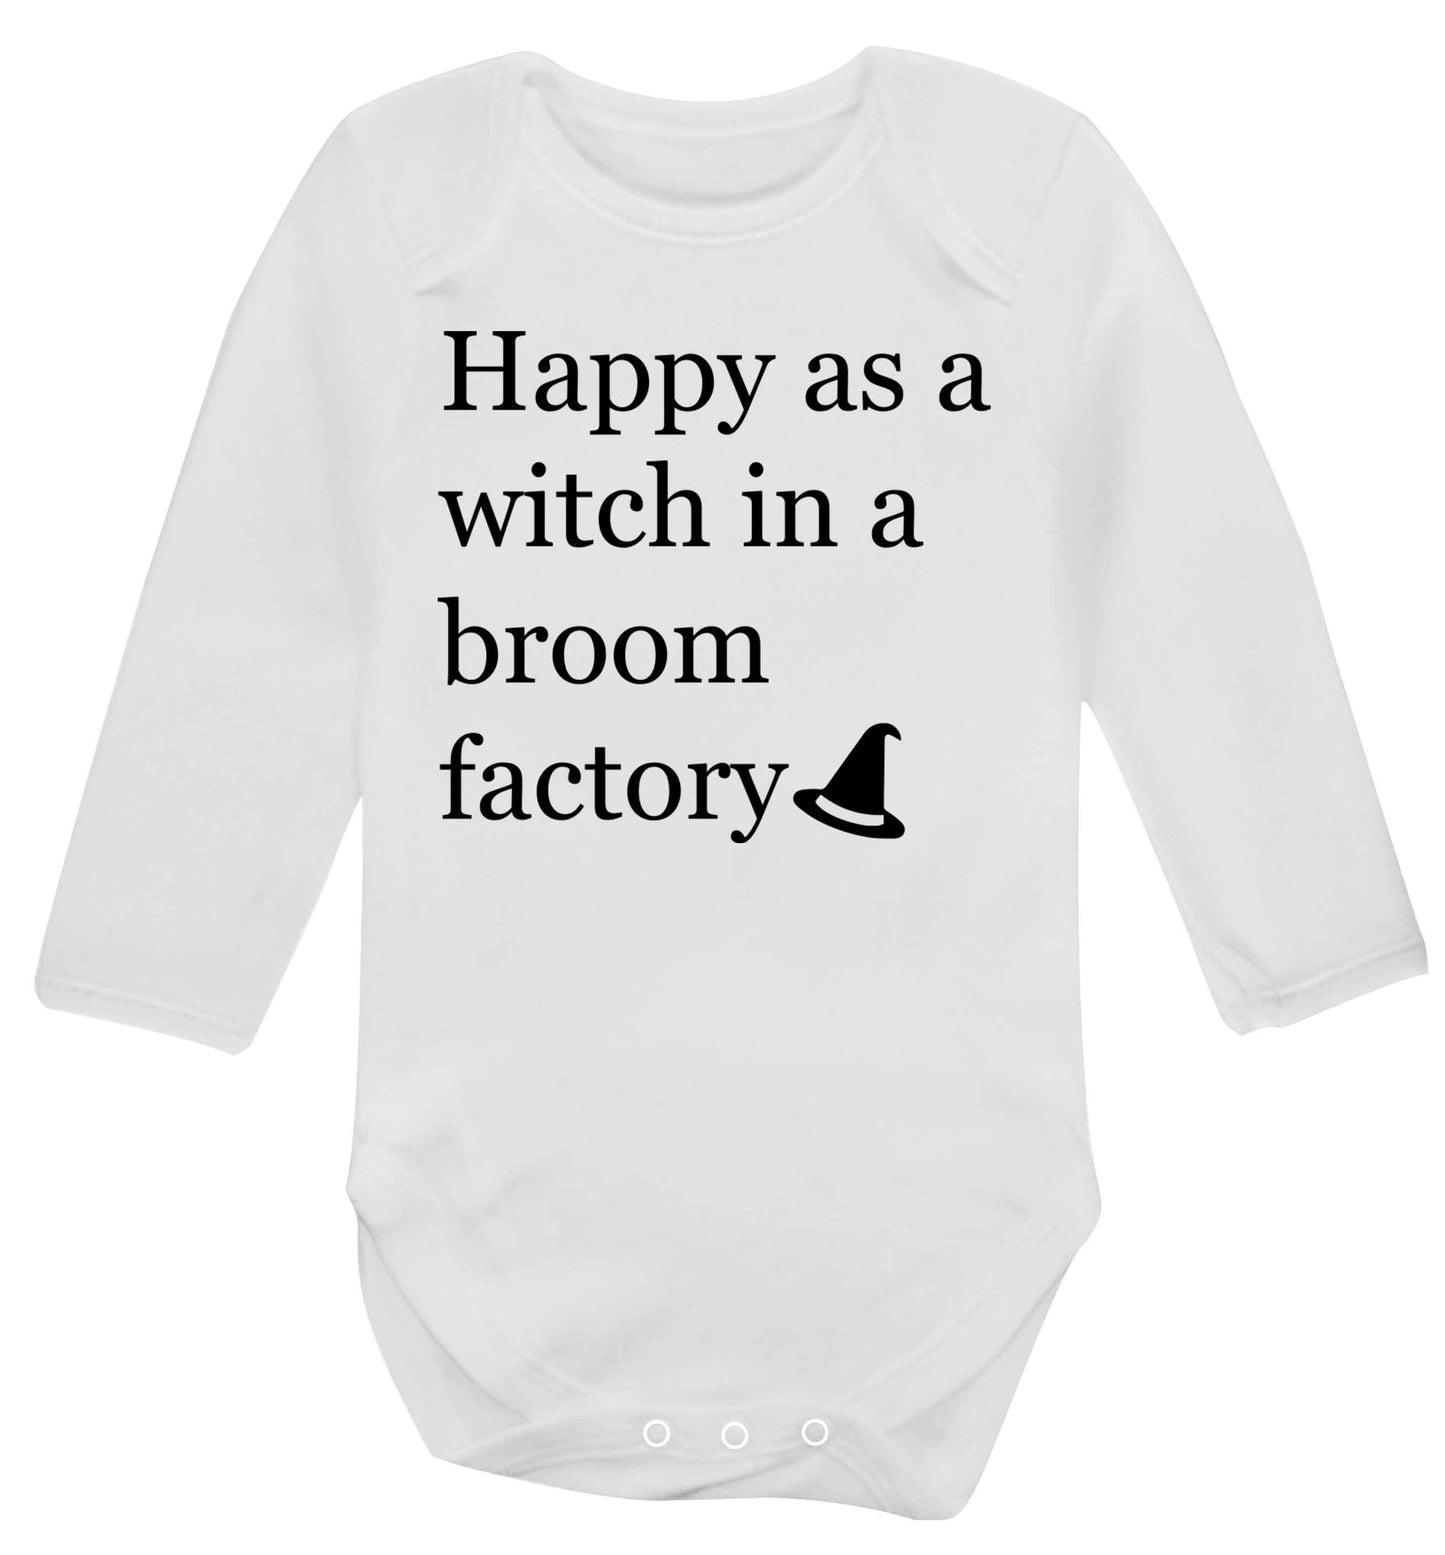 Happy as a witch in a broom factory Baby Vest long sleeved white 6-12 months